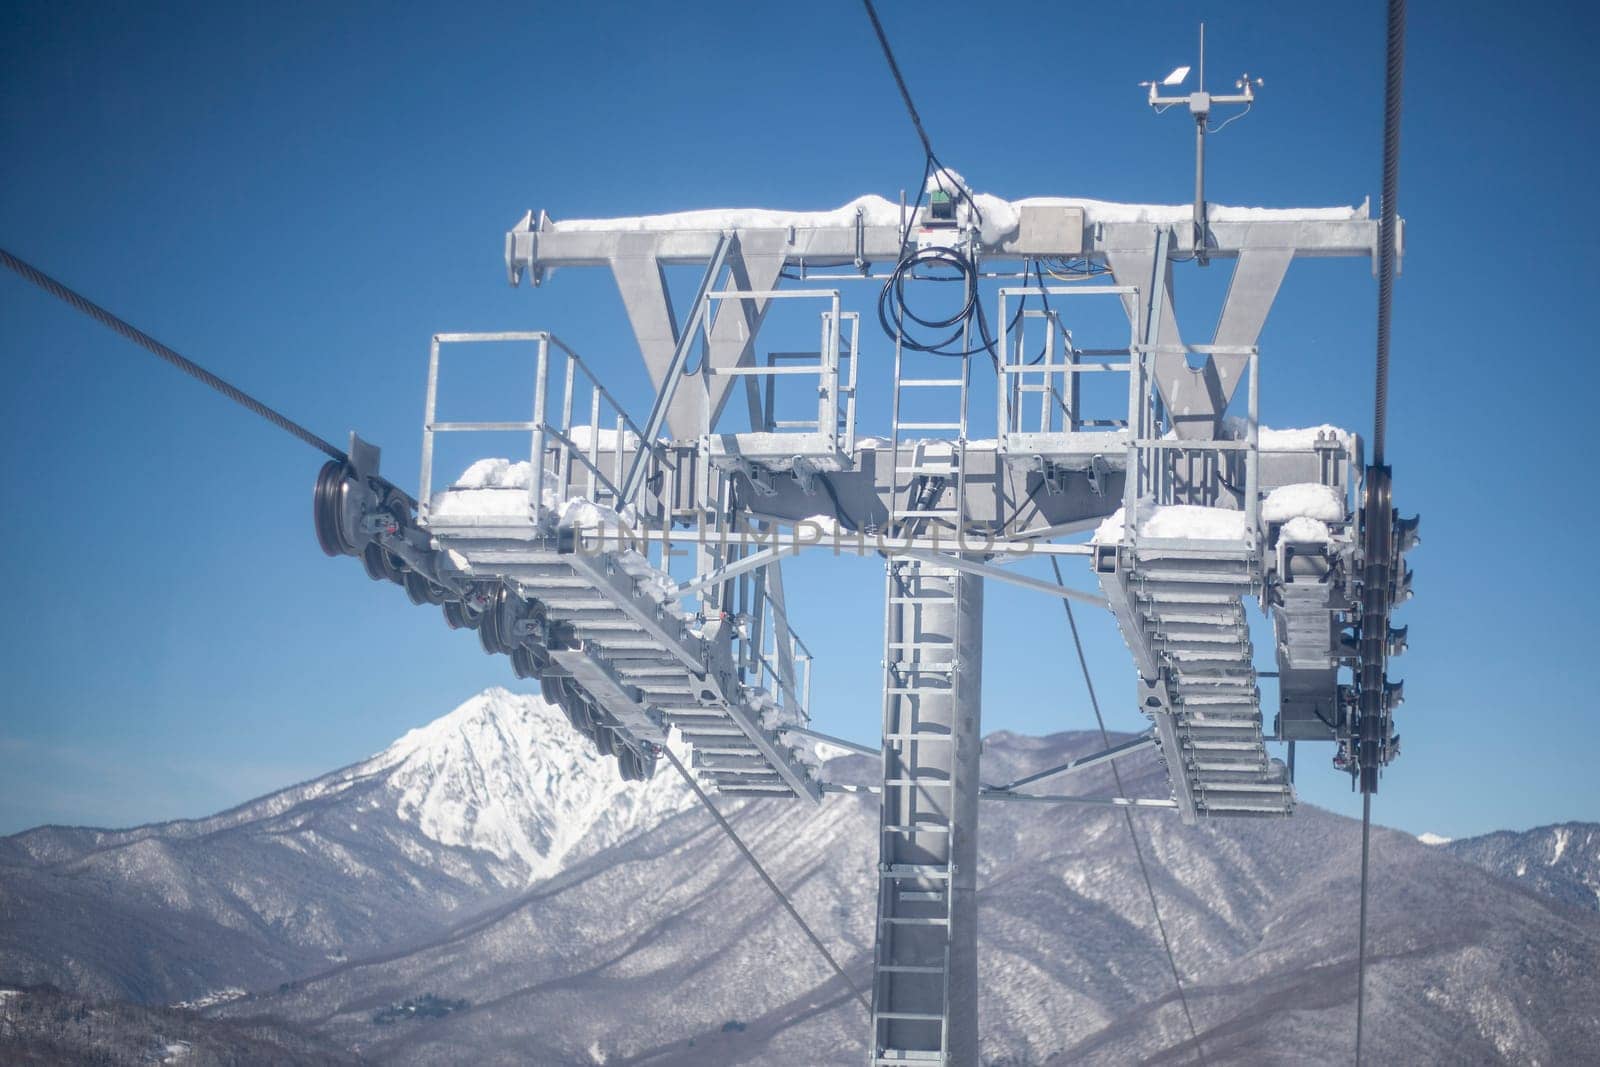 Lift to the mountain. A vehicle for a quick climb to the top. Cableway in the mountains. Cabins for transportation. Booths on steel cables stretched between racks. Relay road technology.